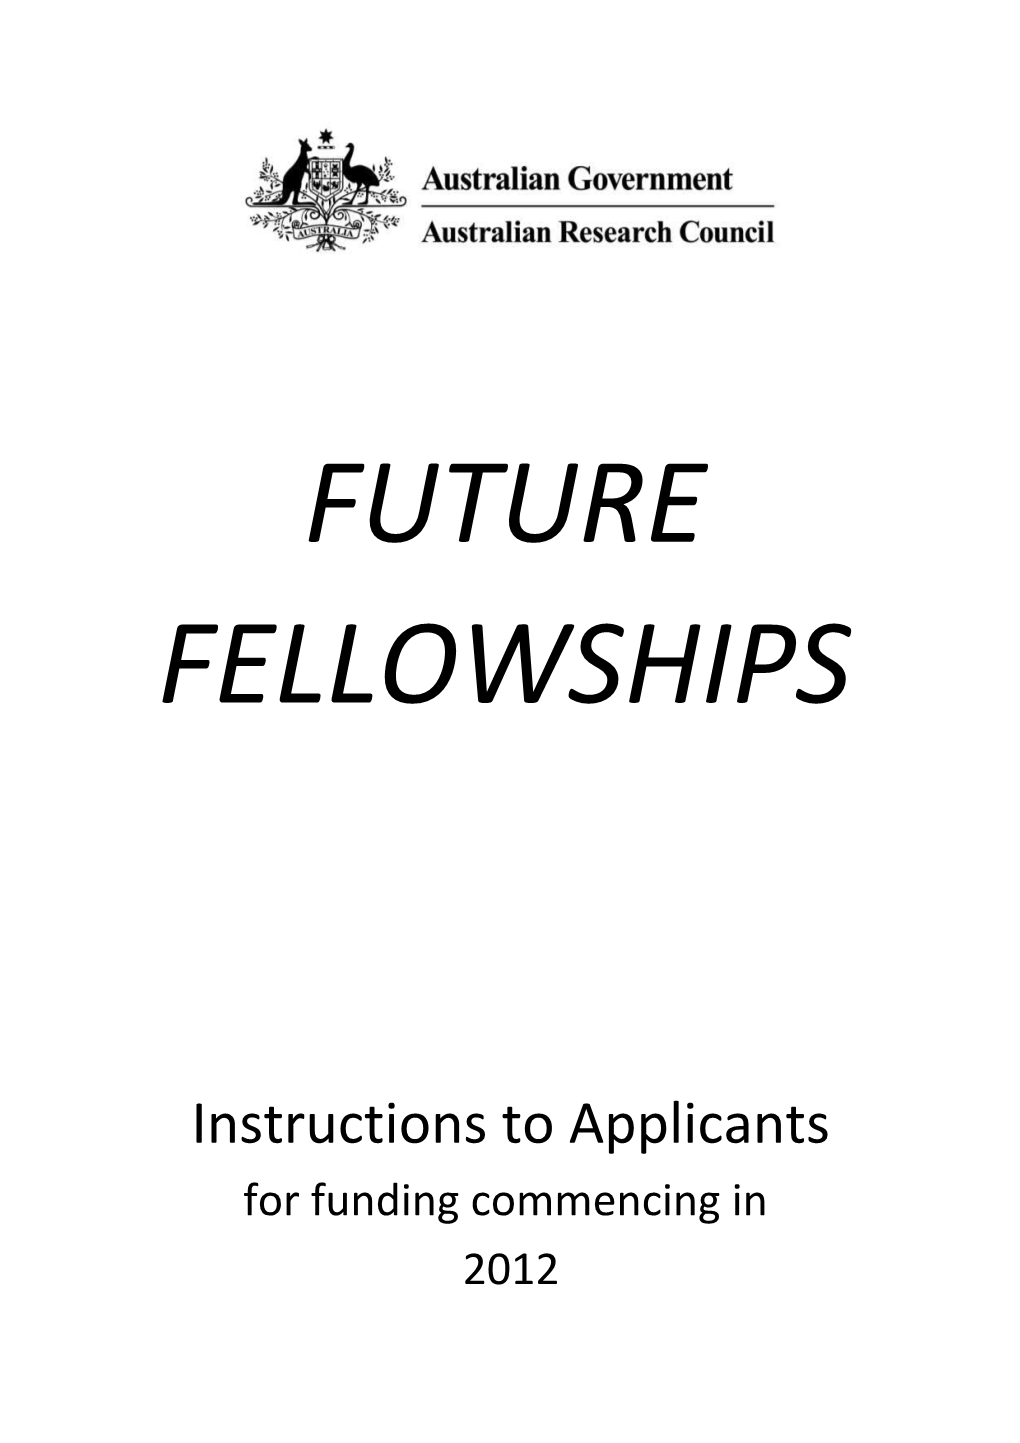 Future Fellowships Instructions to Applicants for Funding Commencing in 2012